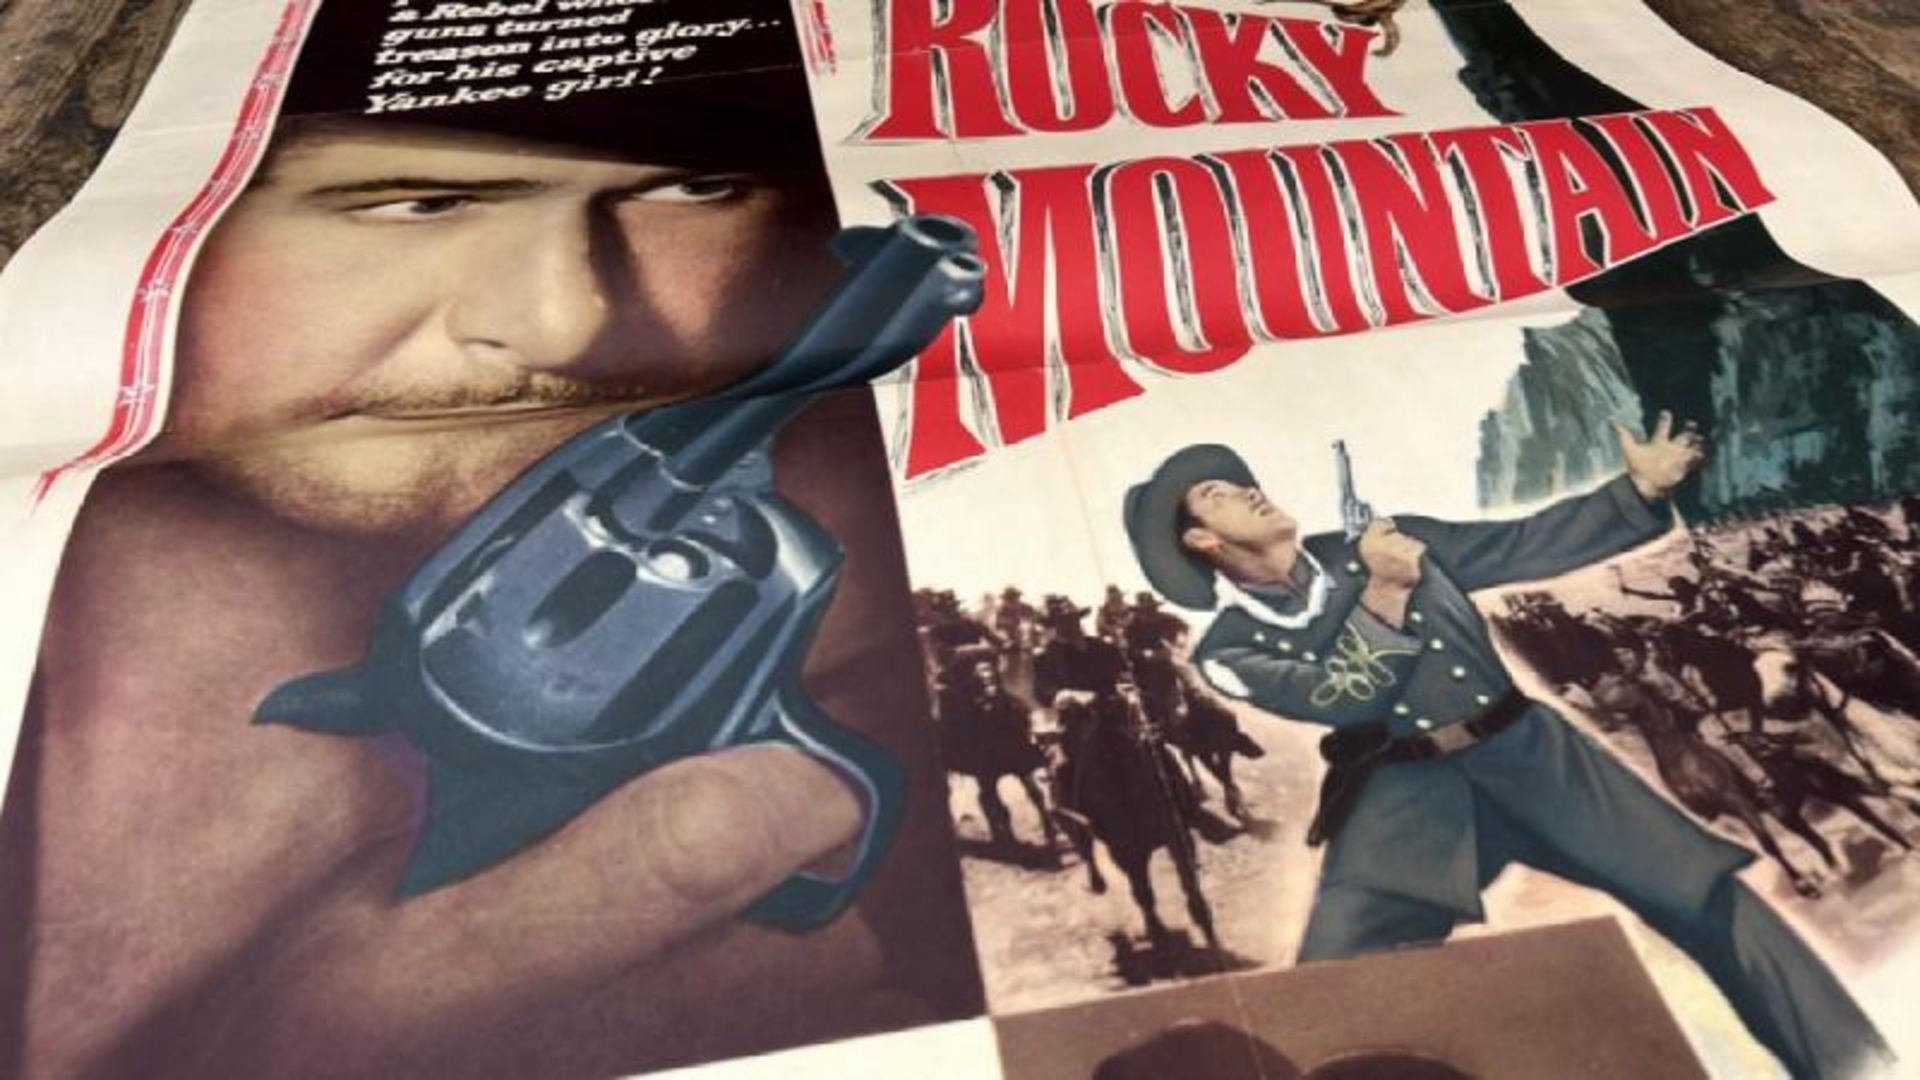 ROCK MOUNTAIN STARRING ERROL FLYNN AND PATRICE WYMORE, ORIGINAL FILM POSTER, 50/559, LITHO IN USA, - Image 4 of 5